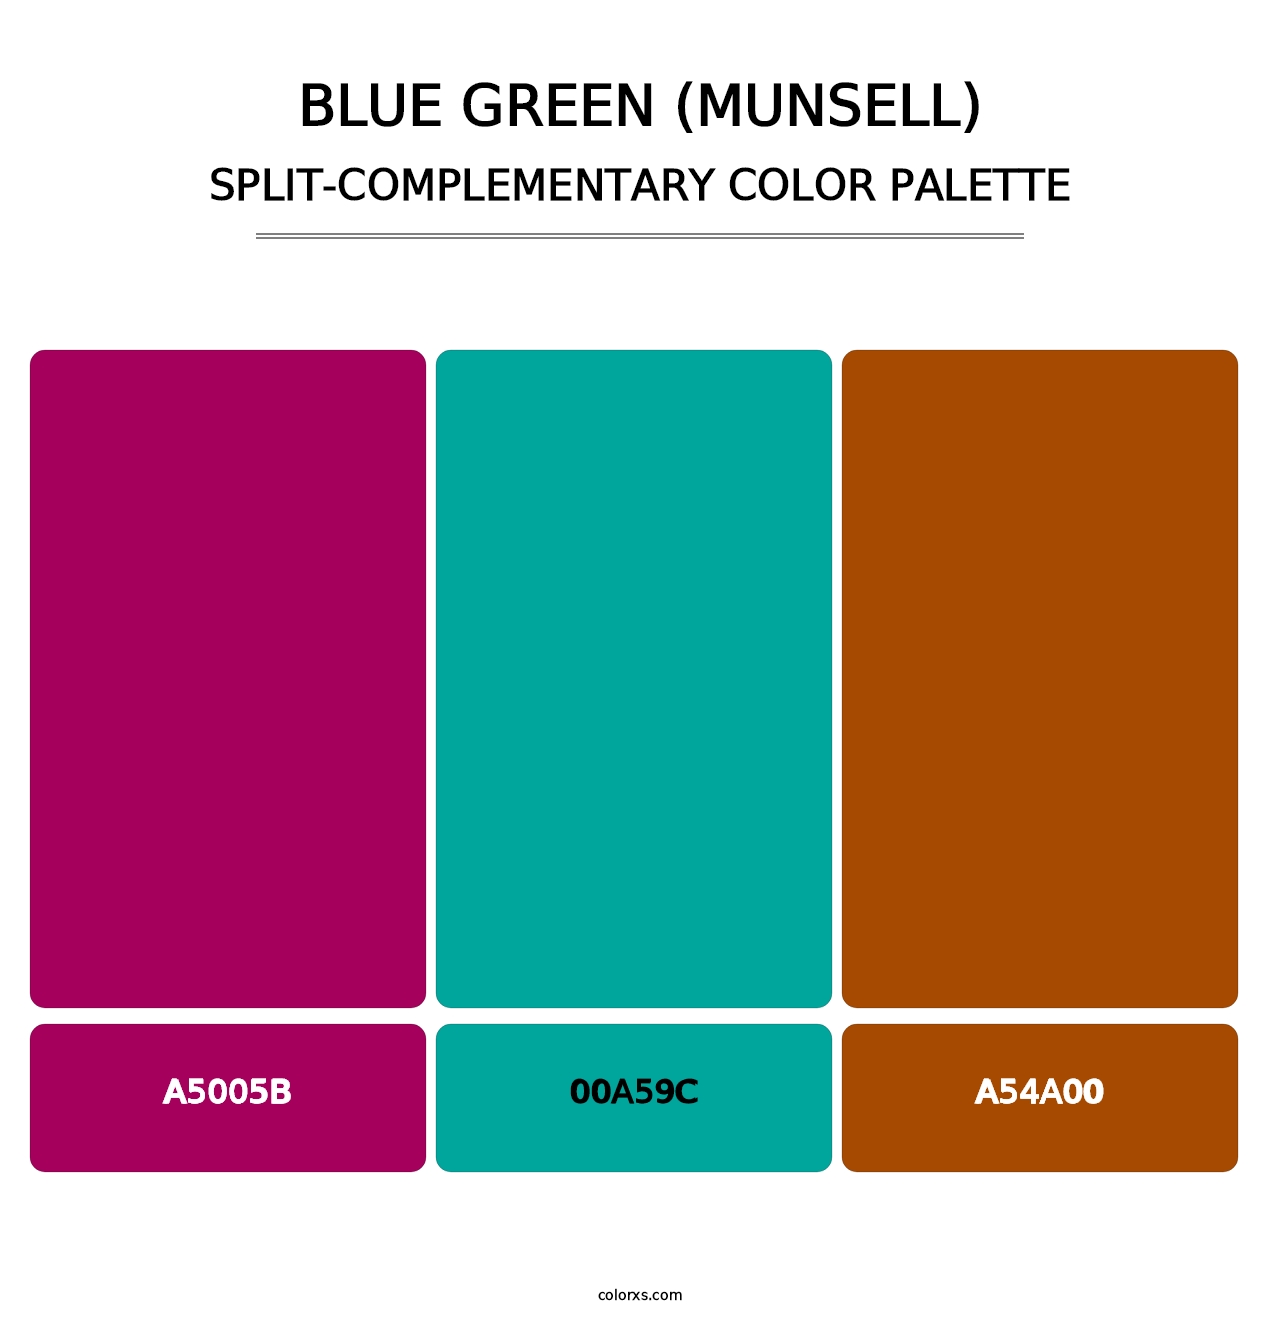 Blue Green (Munsell) - Split-Complementary Color Palette